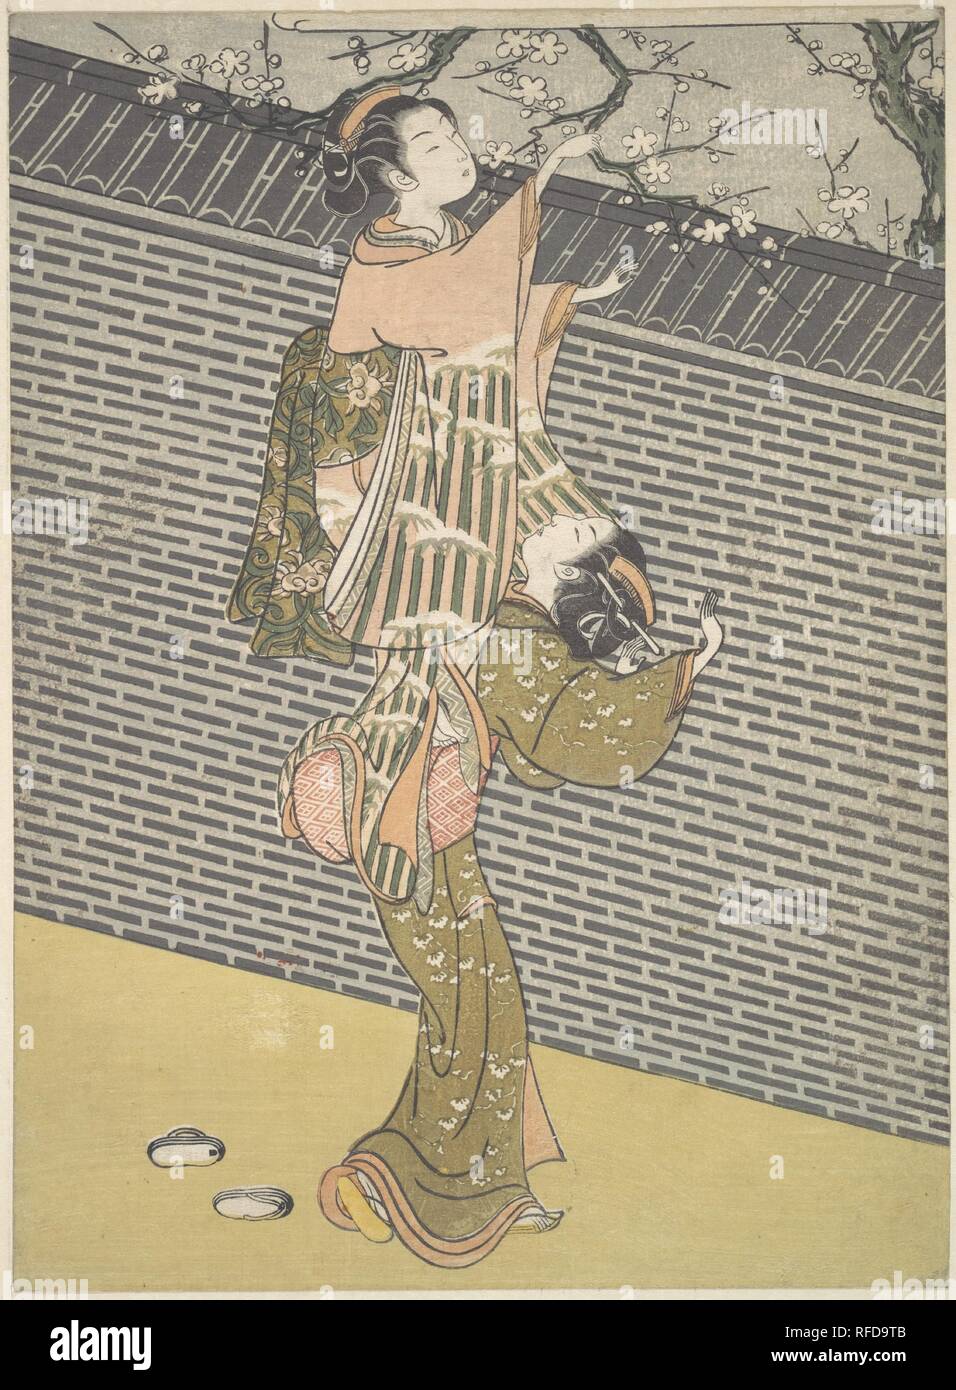 Plucking a Branch from a Neighbor's Plum Tree. Artist: Suzuki Harunobu (Japanese, 1725-1770). Culture: Japan. Dimensions: 10 3/4 x 7 7/8 in. (27.3 x 20 cm)  medium-size print (chu-ban). Date: ca. 1768.  This print is an excellent example of Harunobu's artistic taste--reflecting nonsensuous tenderness and exquisiteness of figures. Casting off her sandals, a young woman has climbed onto her maid's back to break off a branch of a plum tree growing over a tall wall with a tiled ridge. The two women are elegant and gentle despite their tomboyish behavior. The rigid and monotonous pattern of bricks  Stock Photo